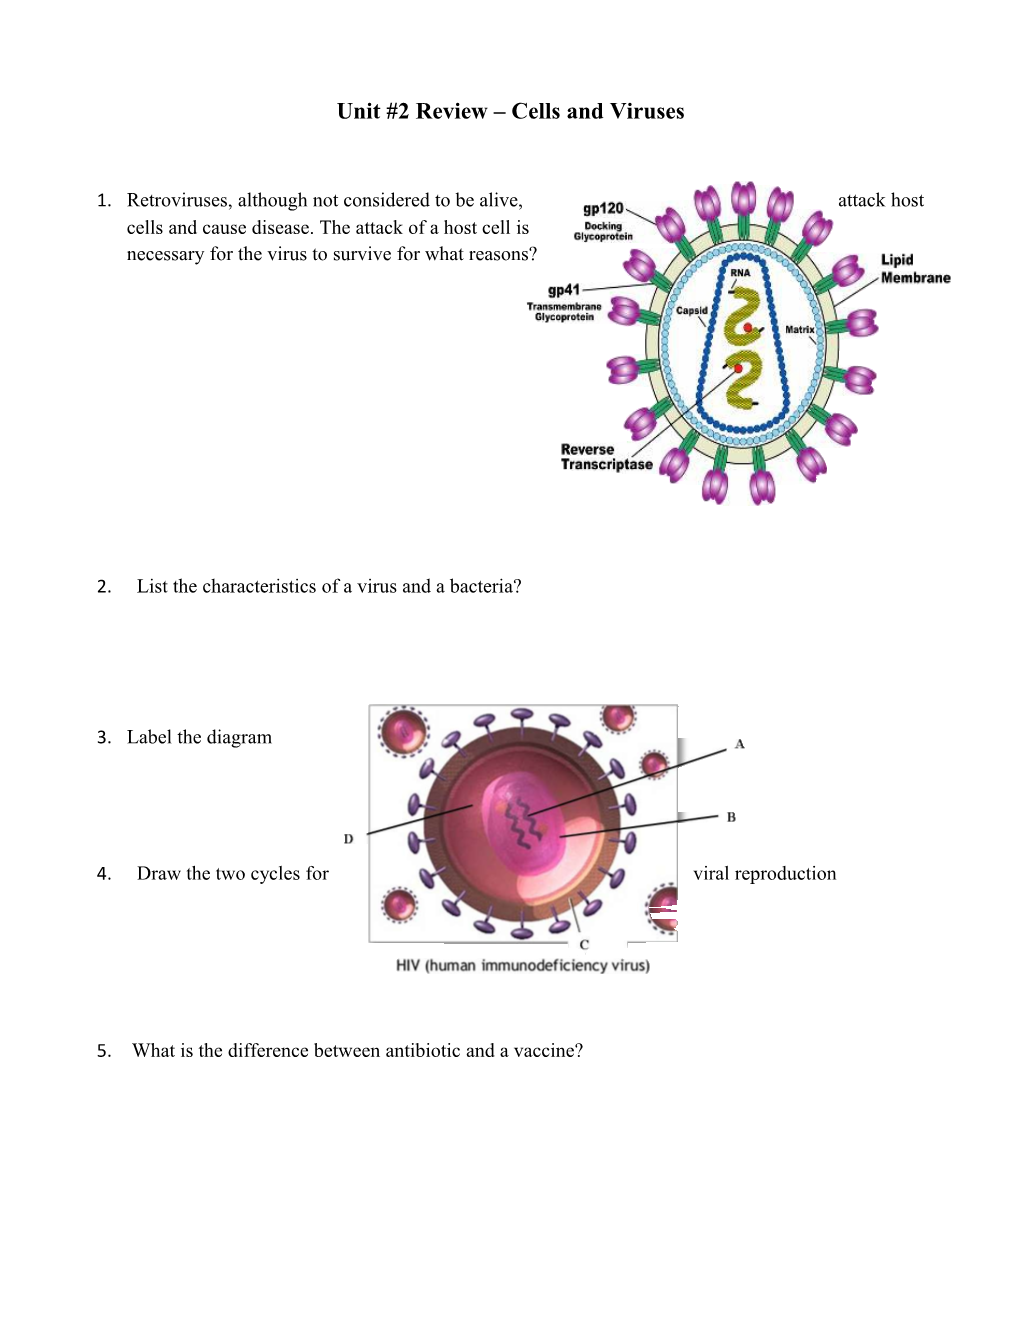 Unit #2 Review Cells and Viruses